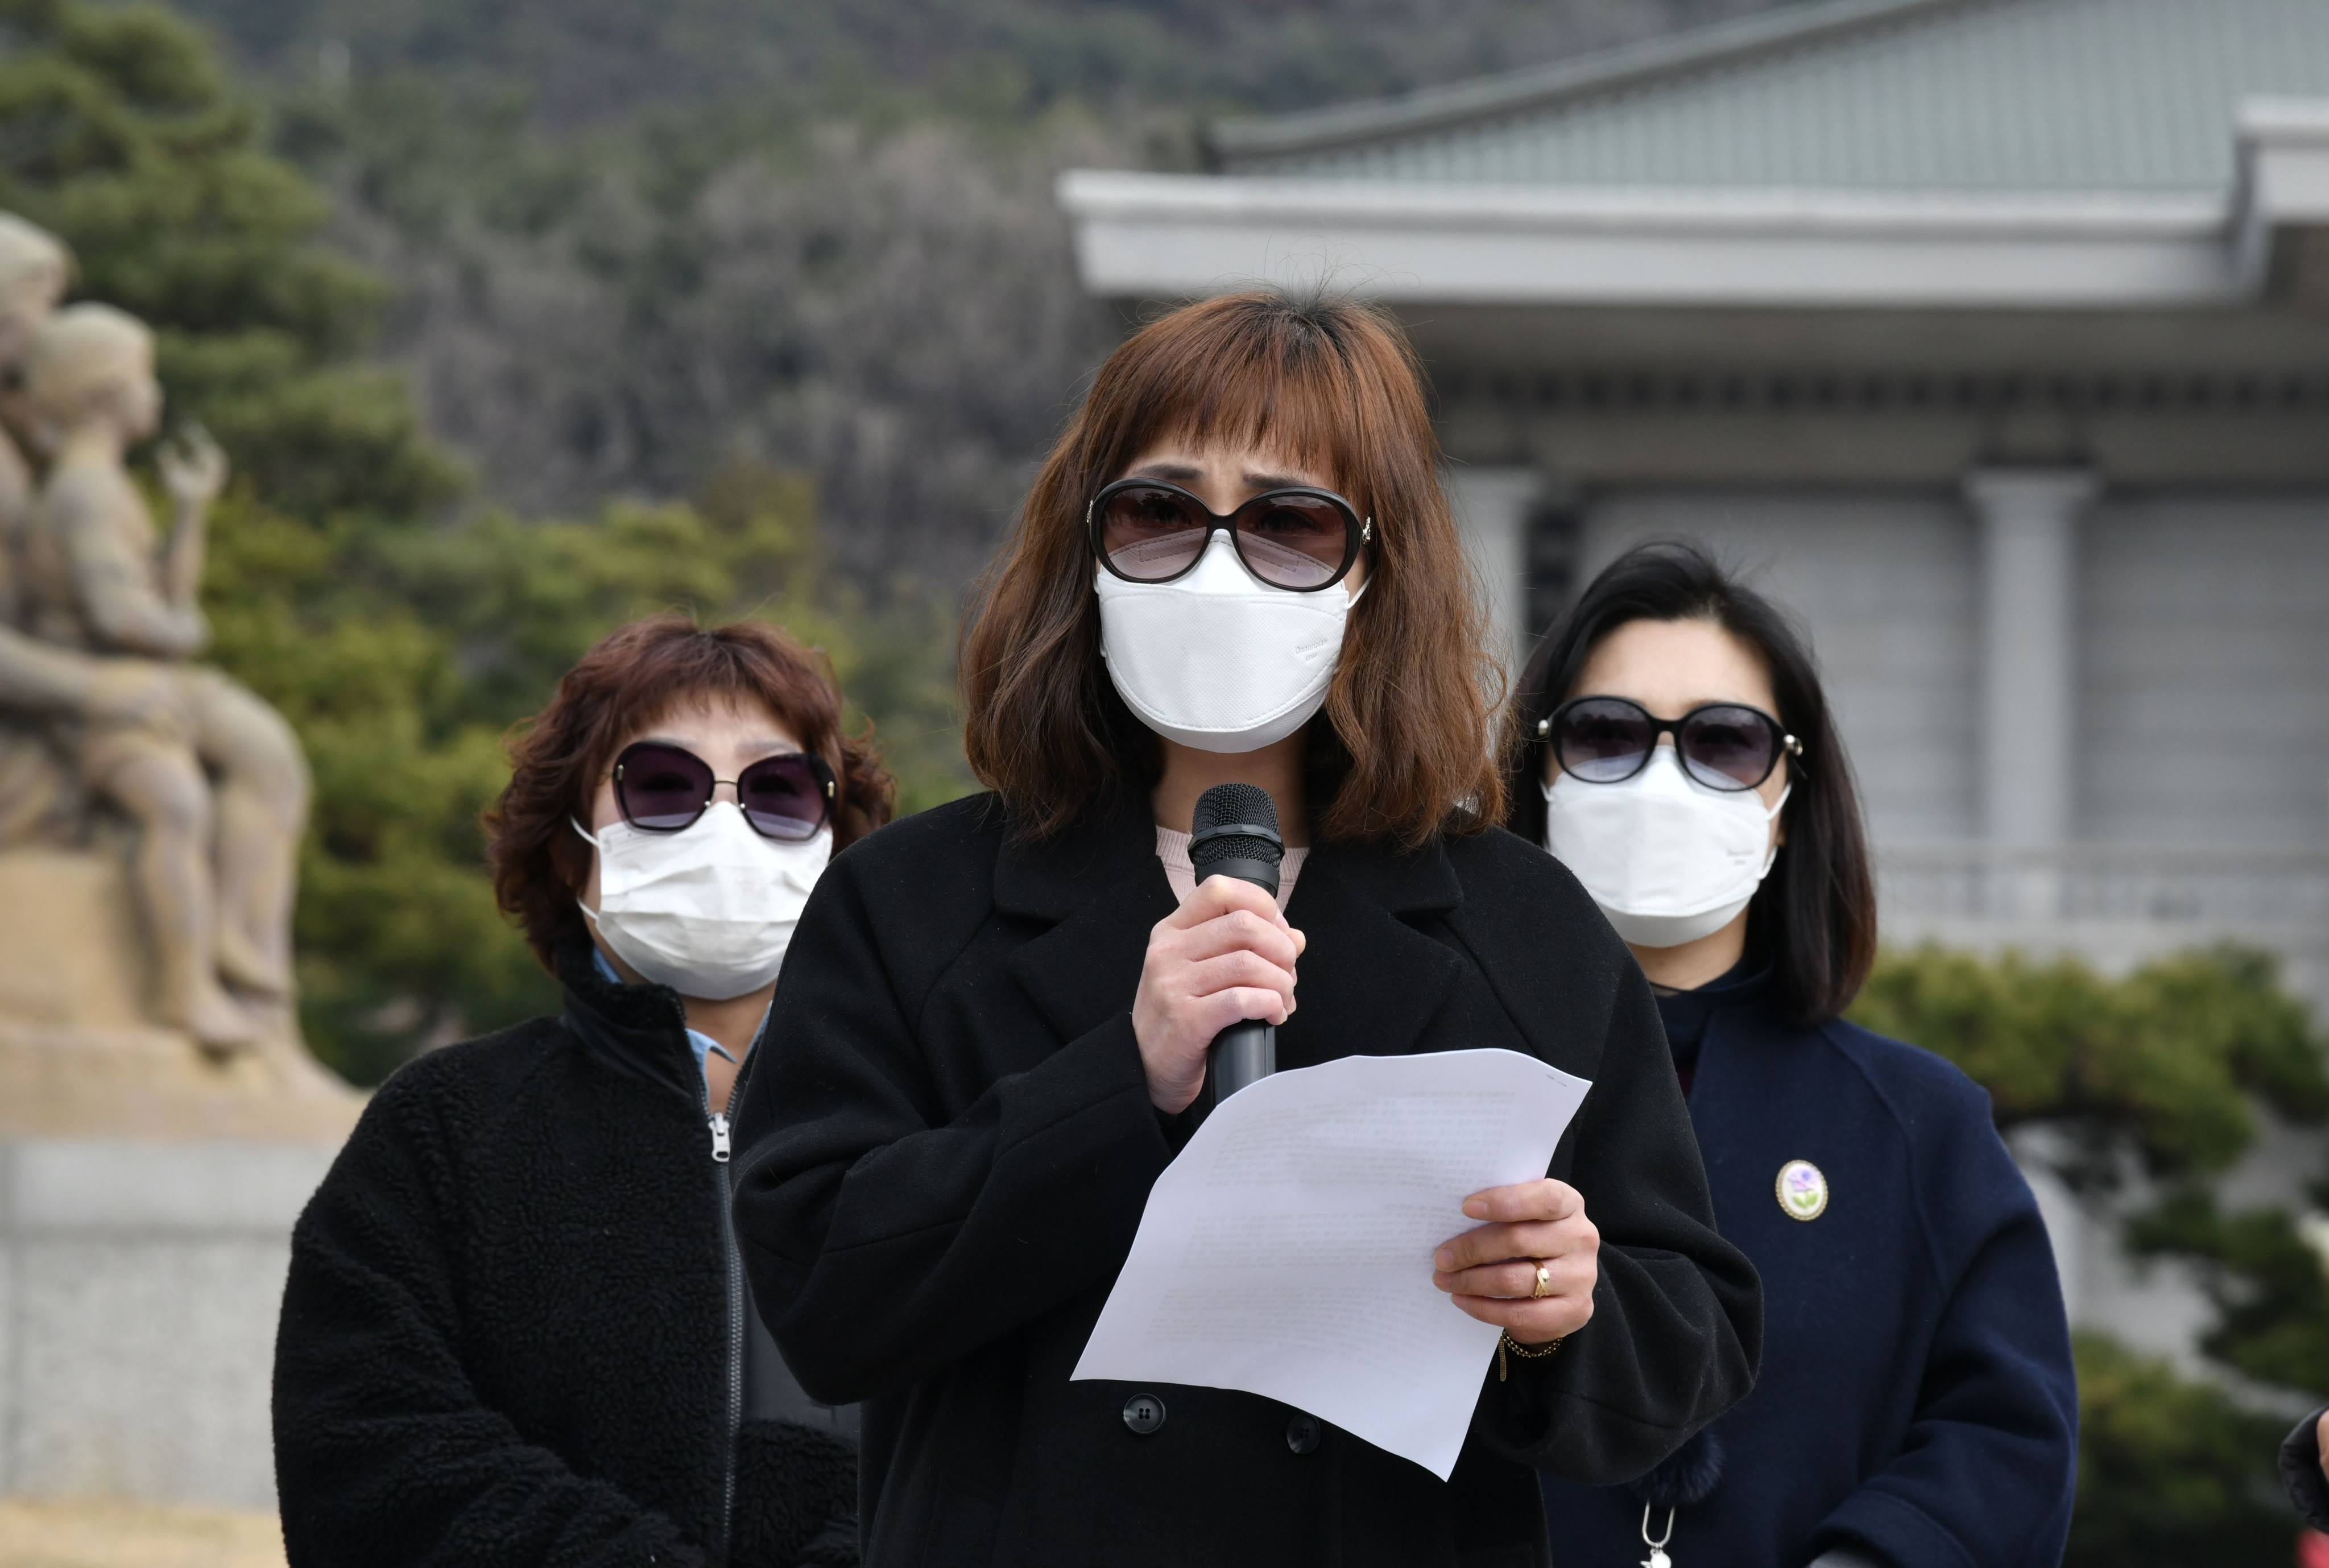 Former followers of South Korea’s Shincheonji Church, which was criticised for its public gatherings during the coronavirus outbreak. Photo: AFP